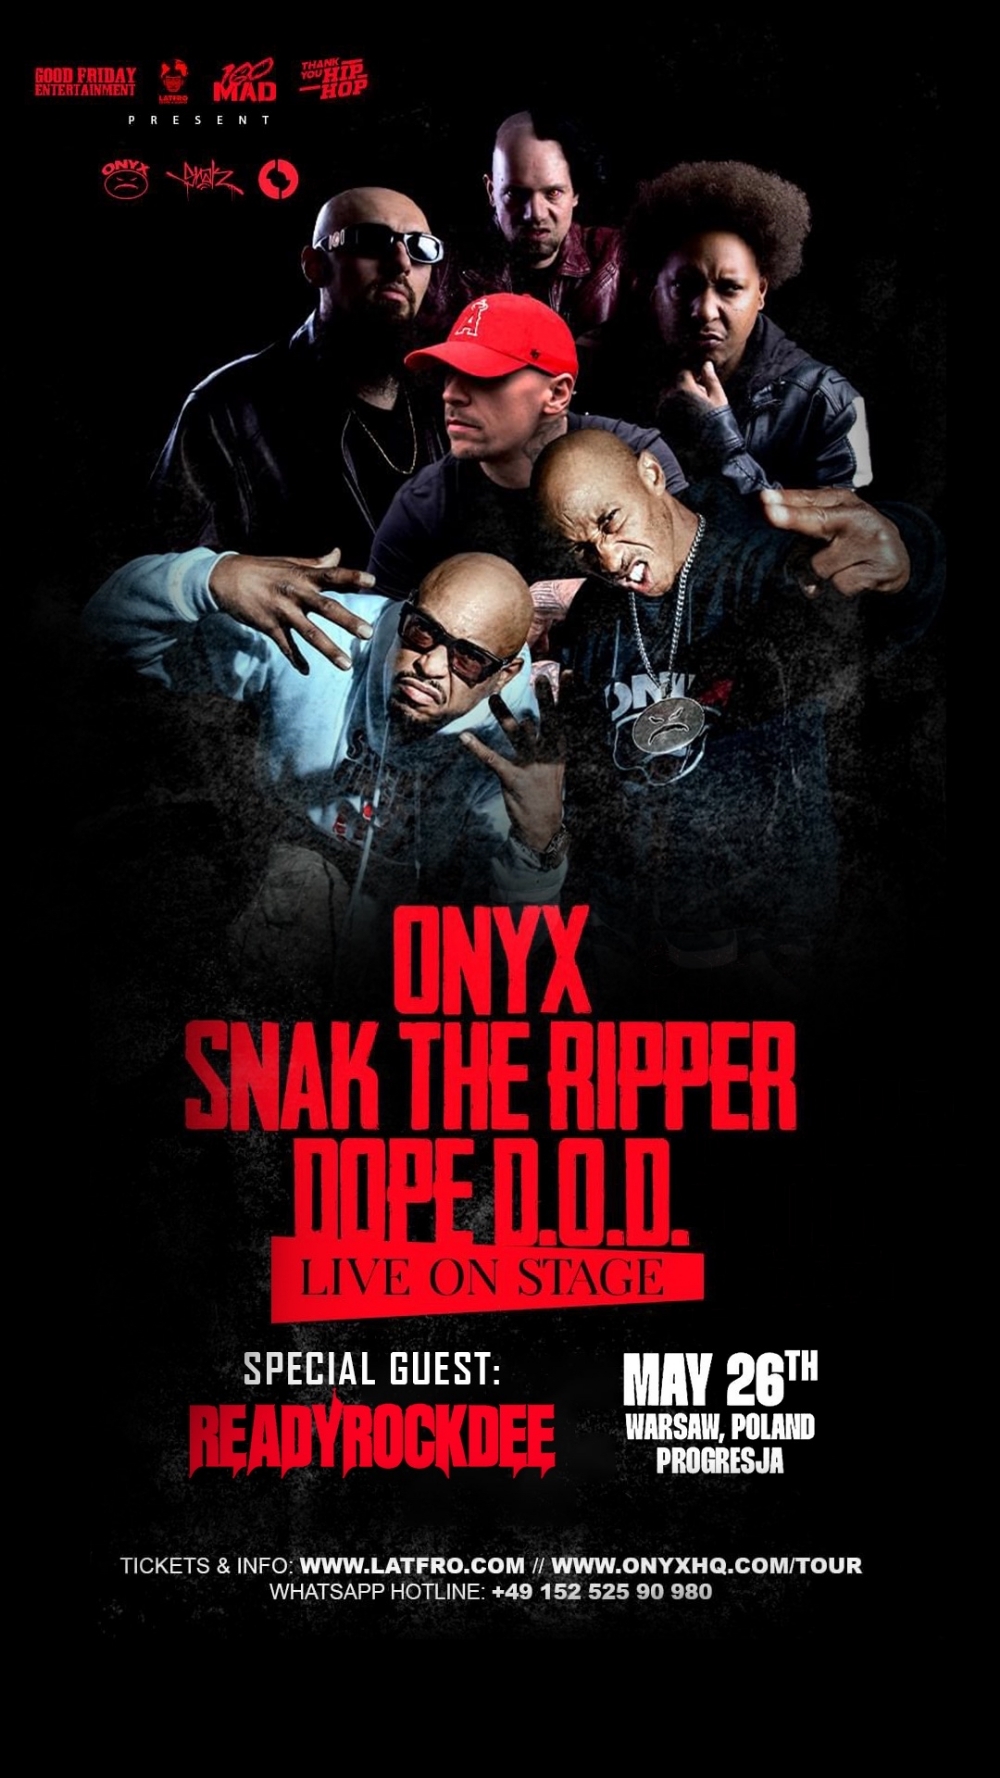 ReadyRockDee Added As Special Guest Performer With ONYX in Warsaw, Poland - May 26